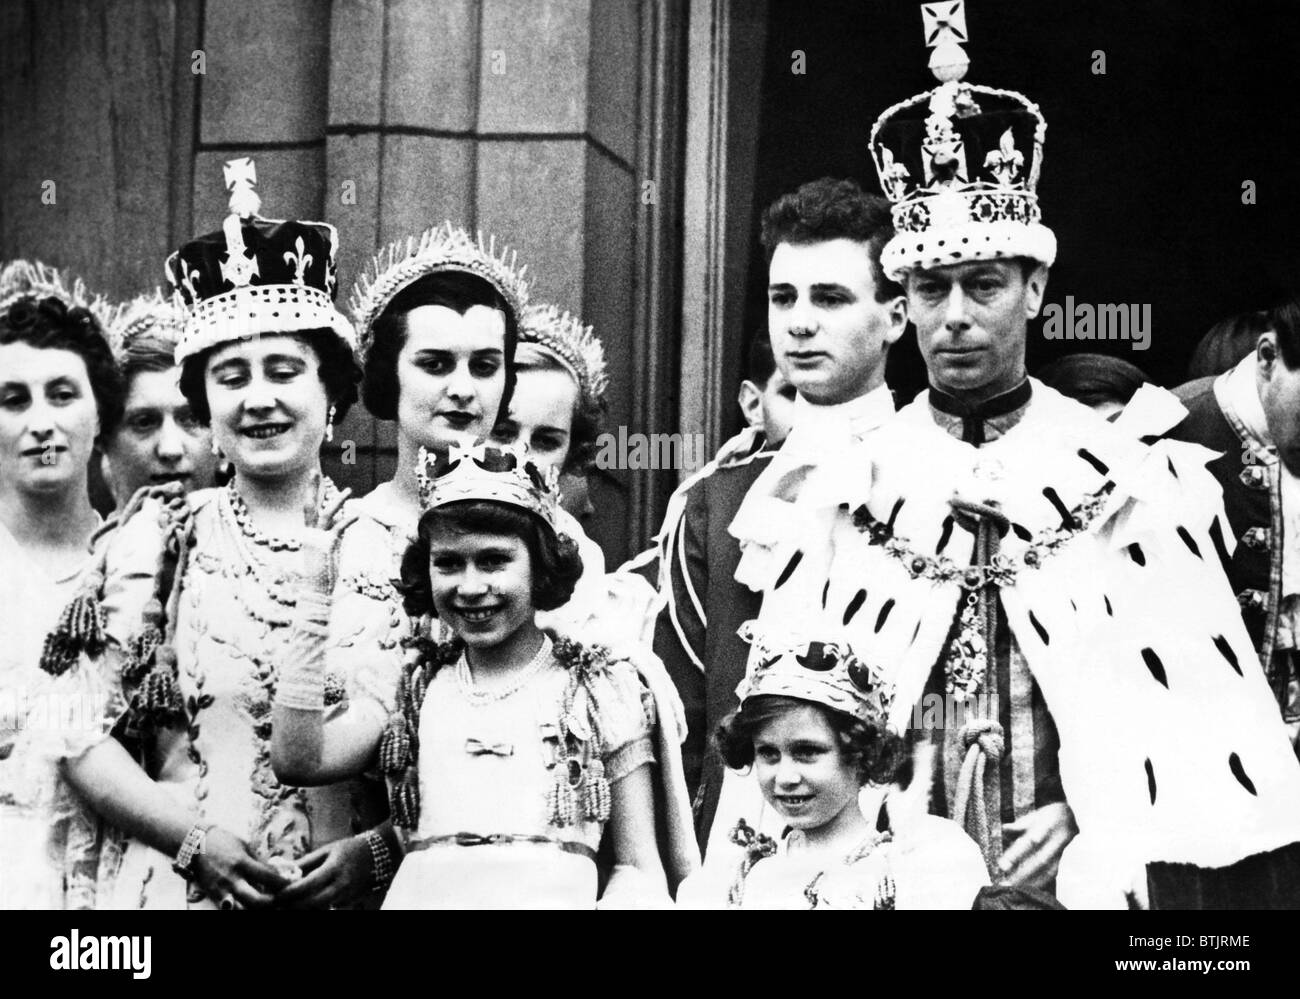 British Royalty. King George VI of England and British Queen Elizabeth  (future Queen Mother), circa 1930s Stock Photo - Alamy